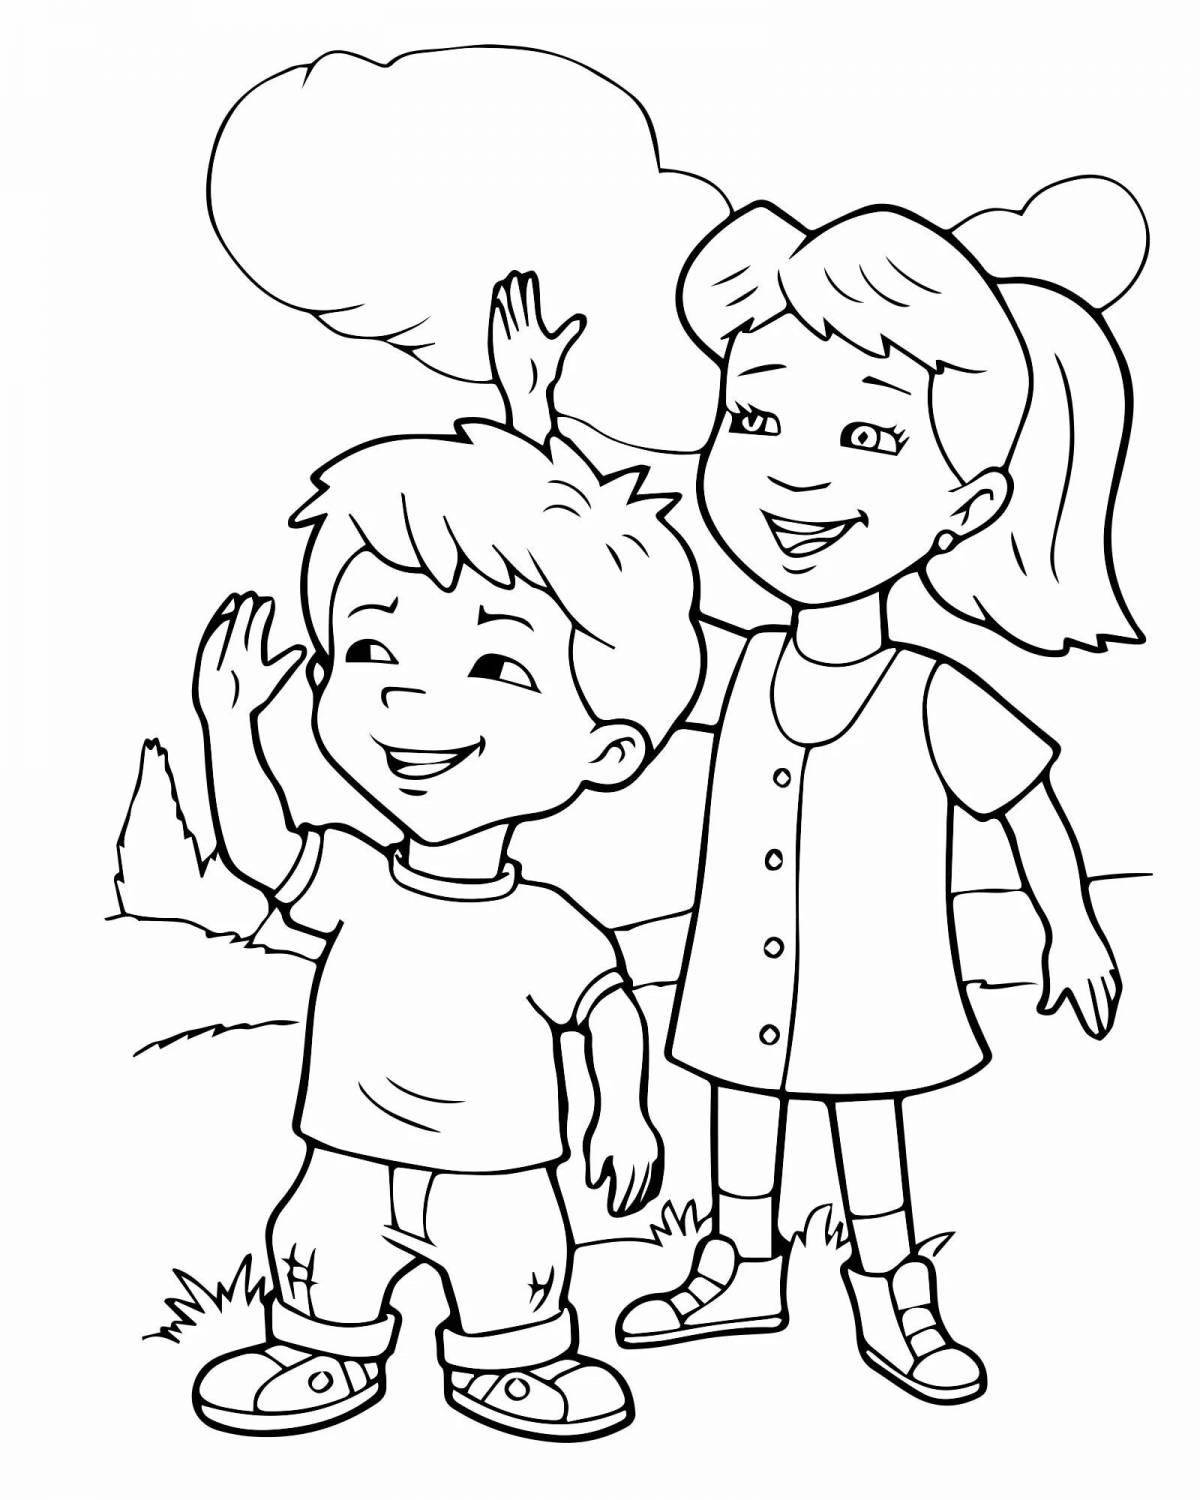 Coloring pages for boys and girls